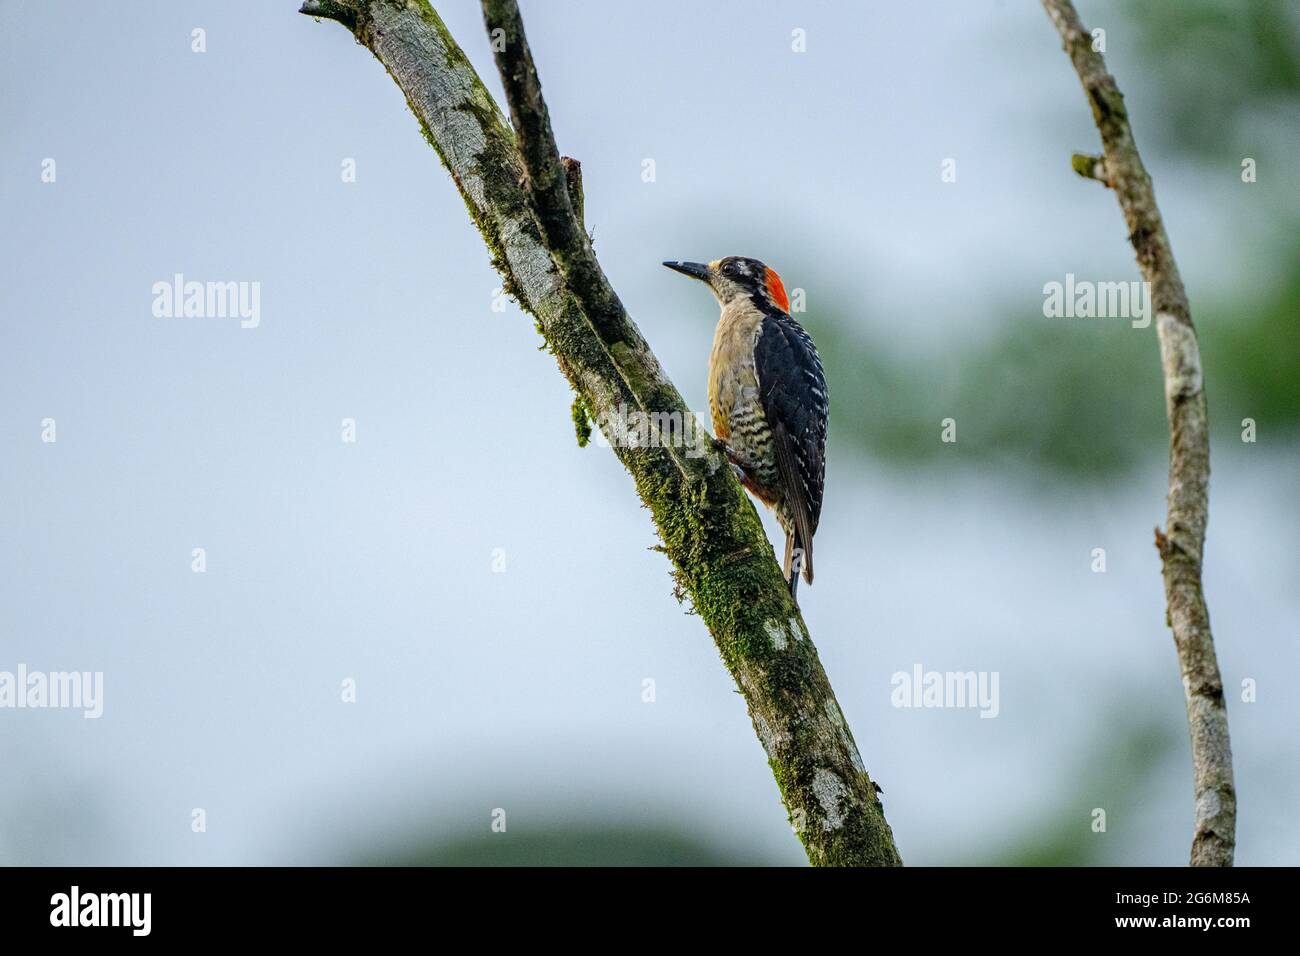 The black-cheeked woodpecker (Melanerpes pucherani) is a resident breeding bird from southeastern Mexico south to western Ecuador. This woodpecker occ Stock Photo